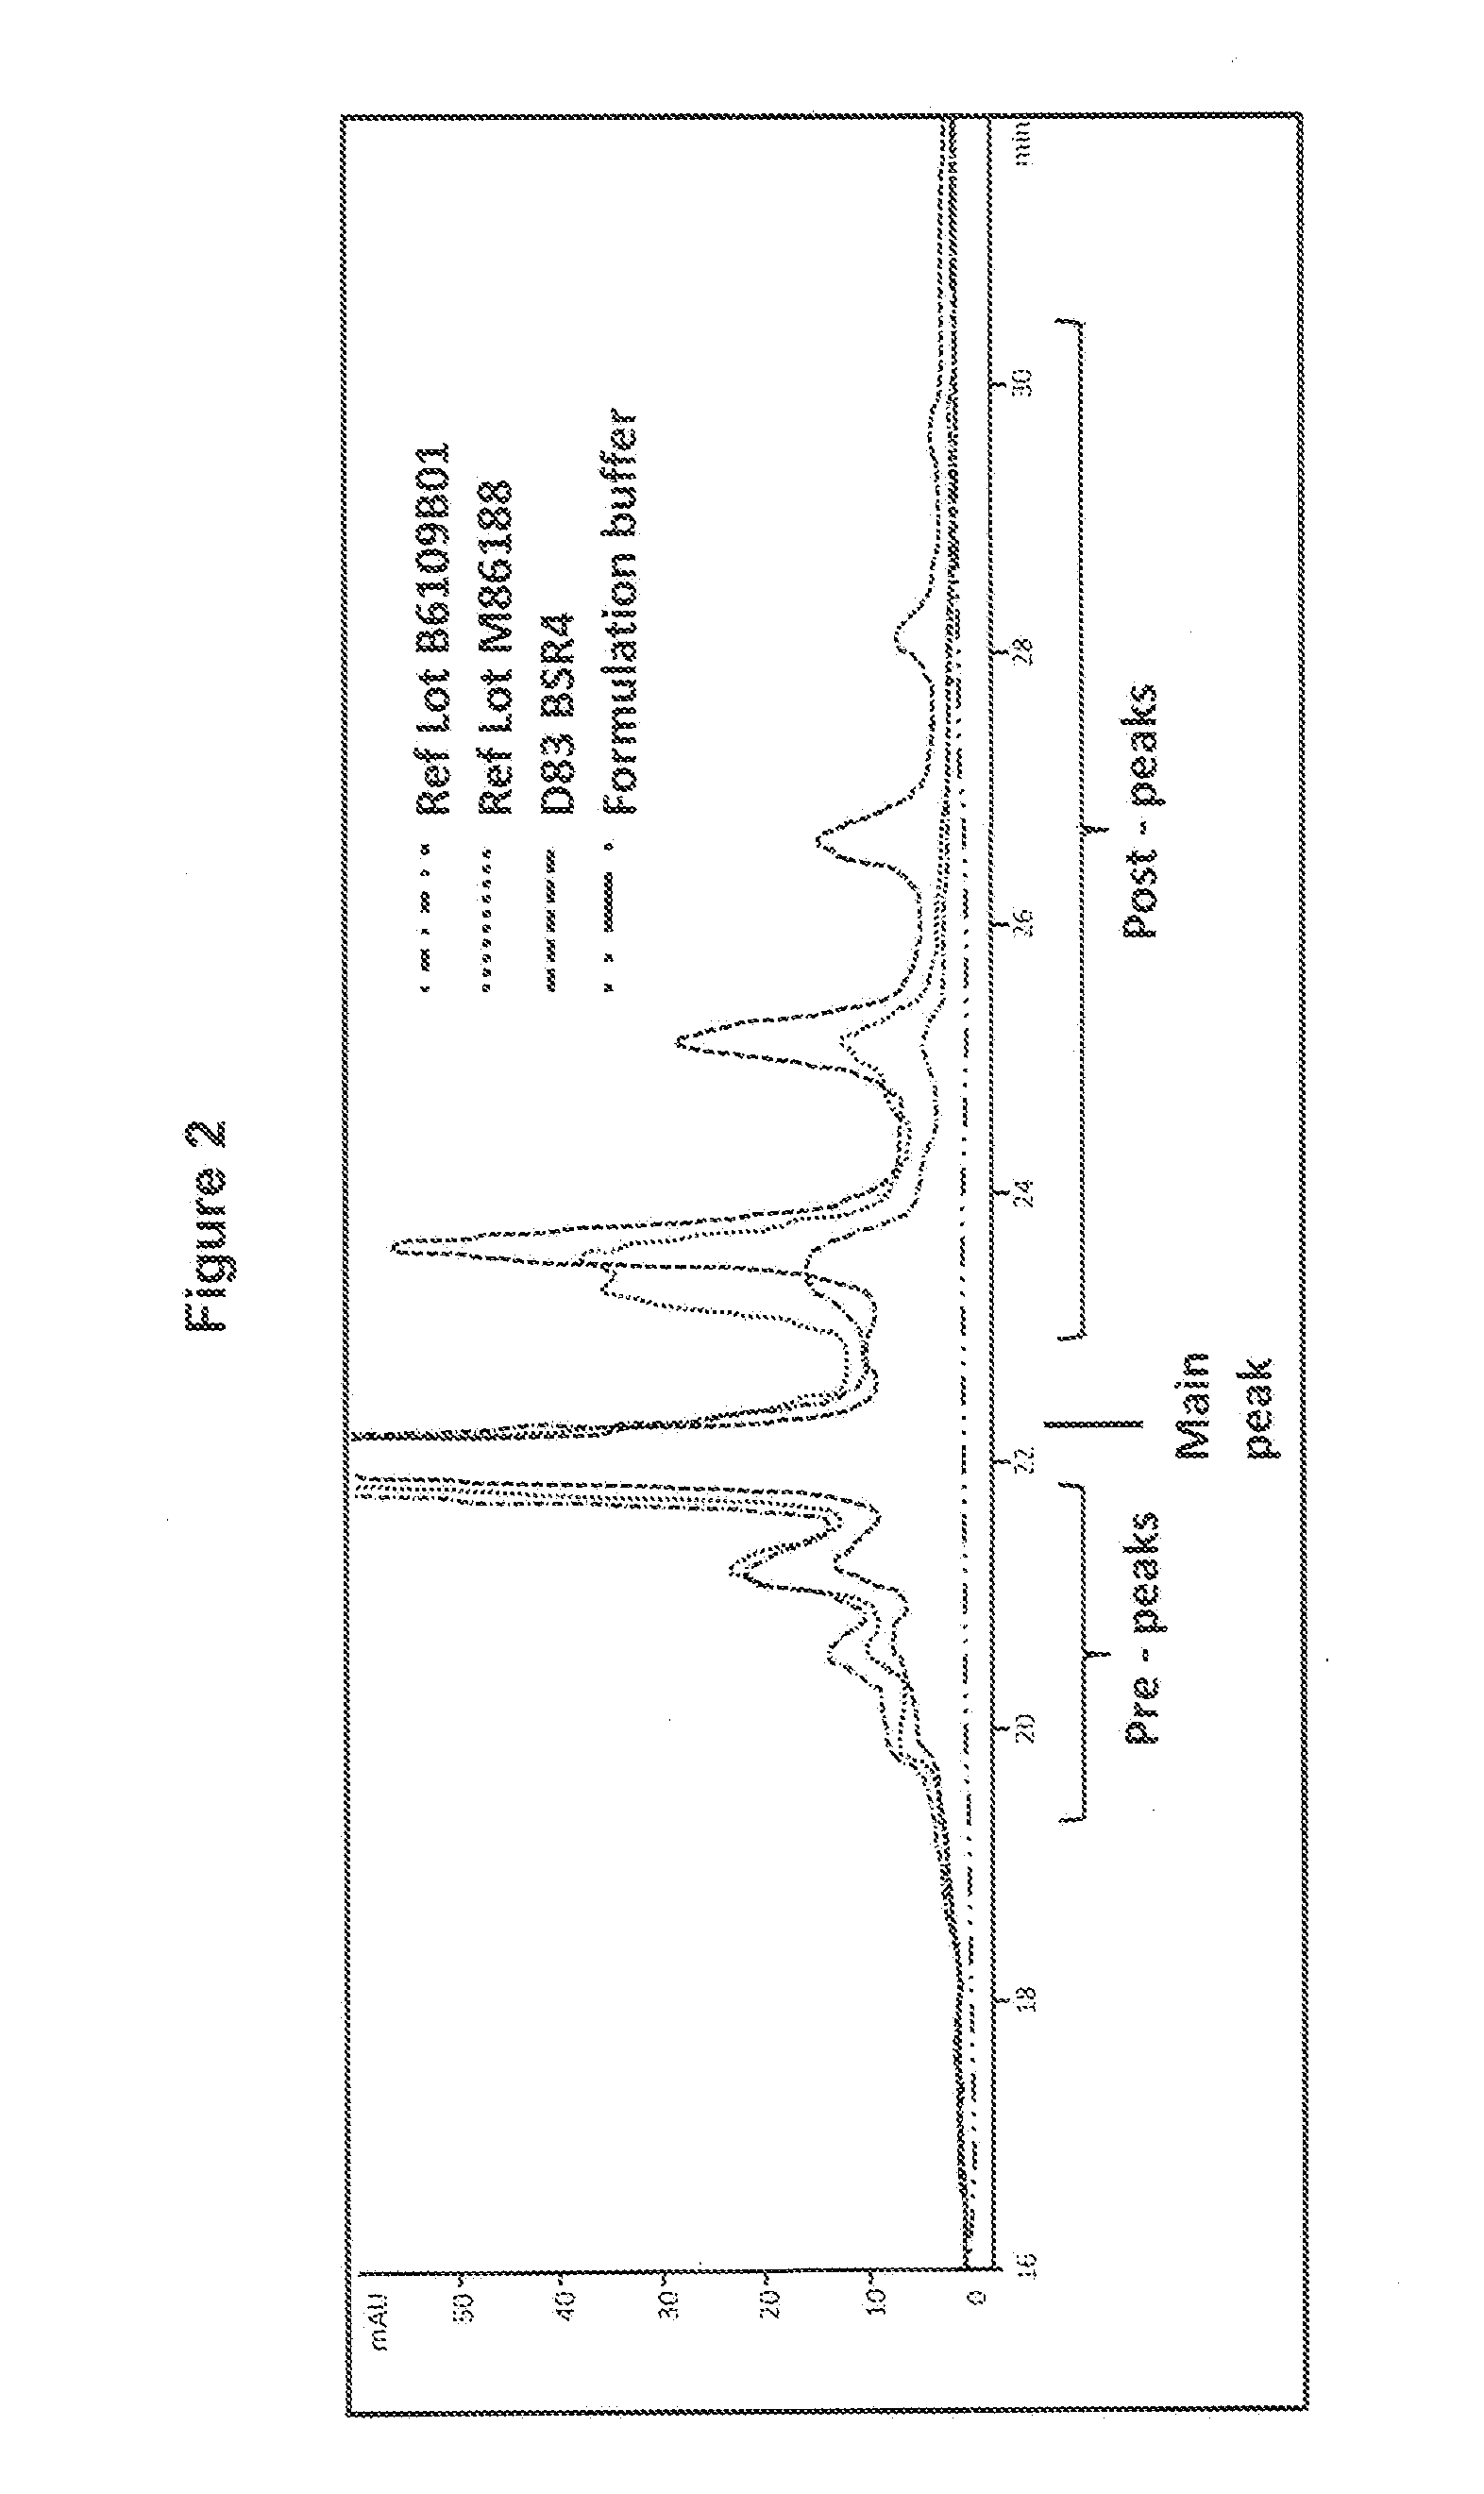 Method for increasing pyro-glutamic acid formation of a protein